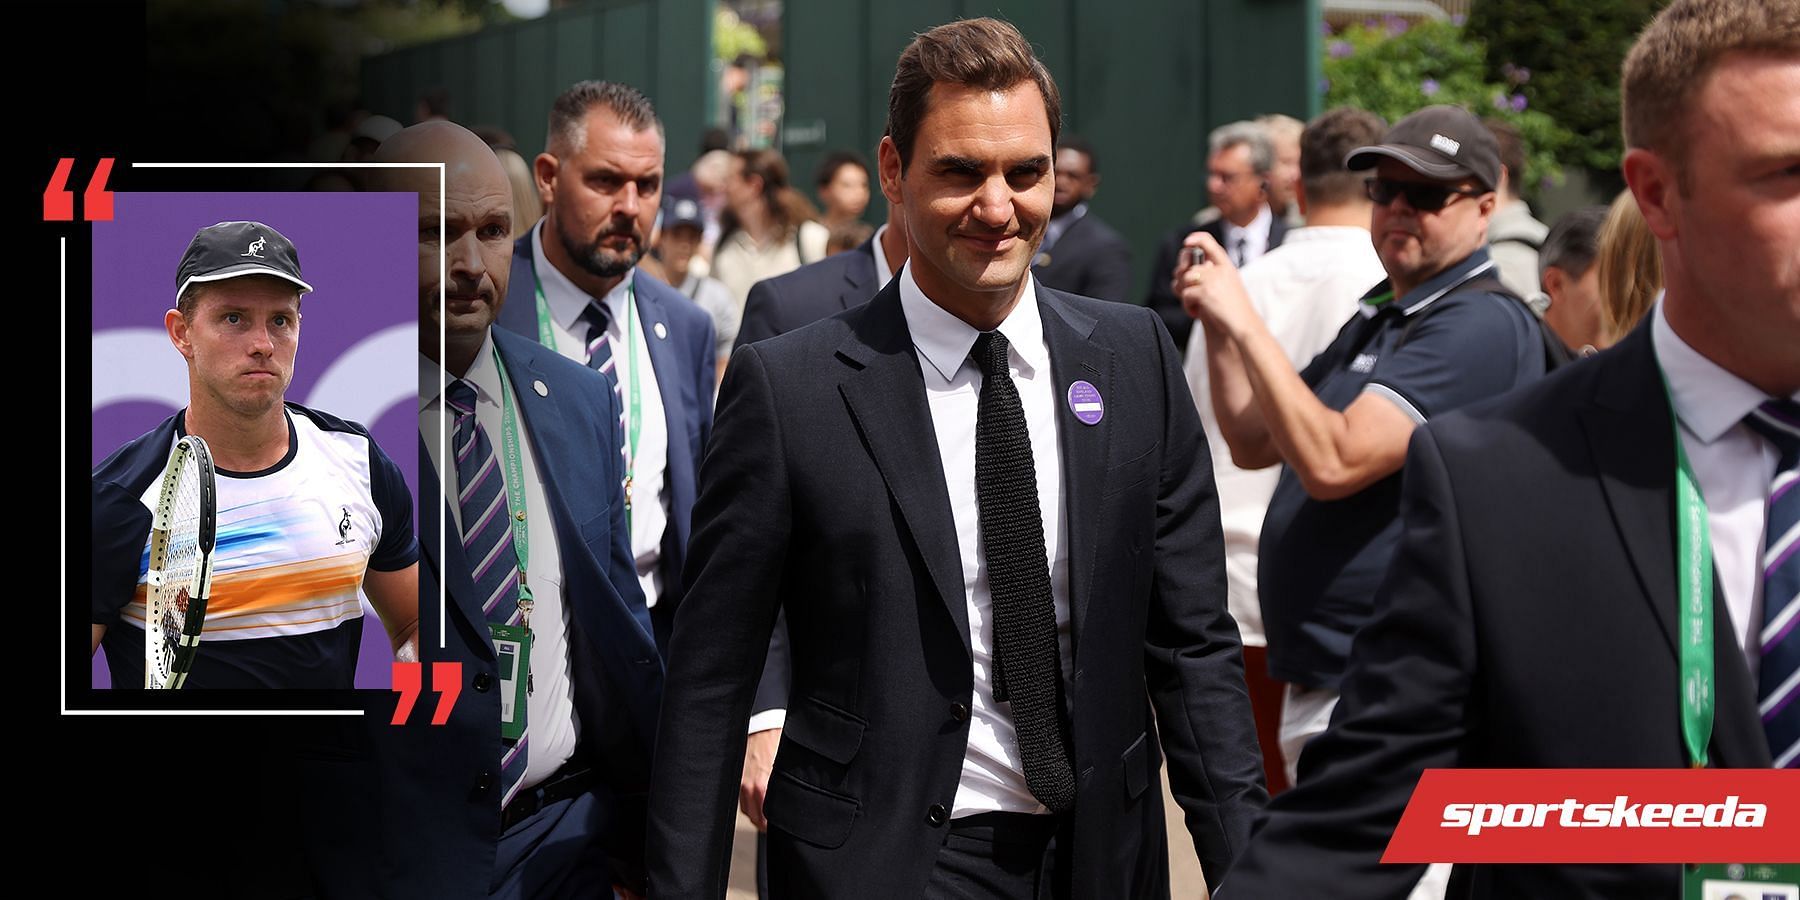 James Duckworth tells a funny anecdote about Roger Federer